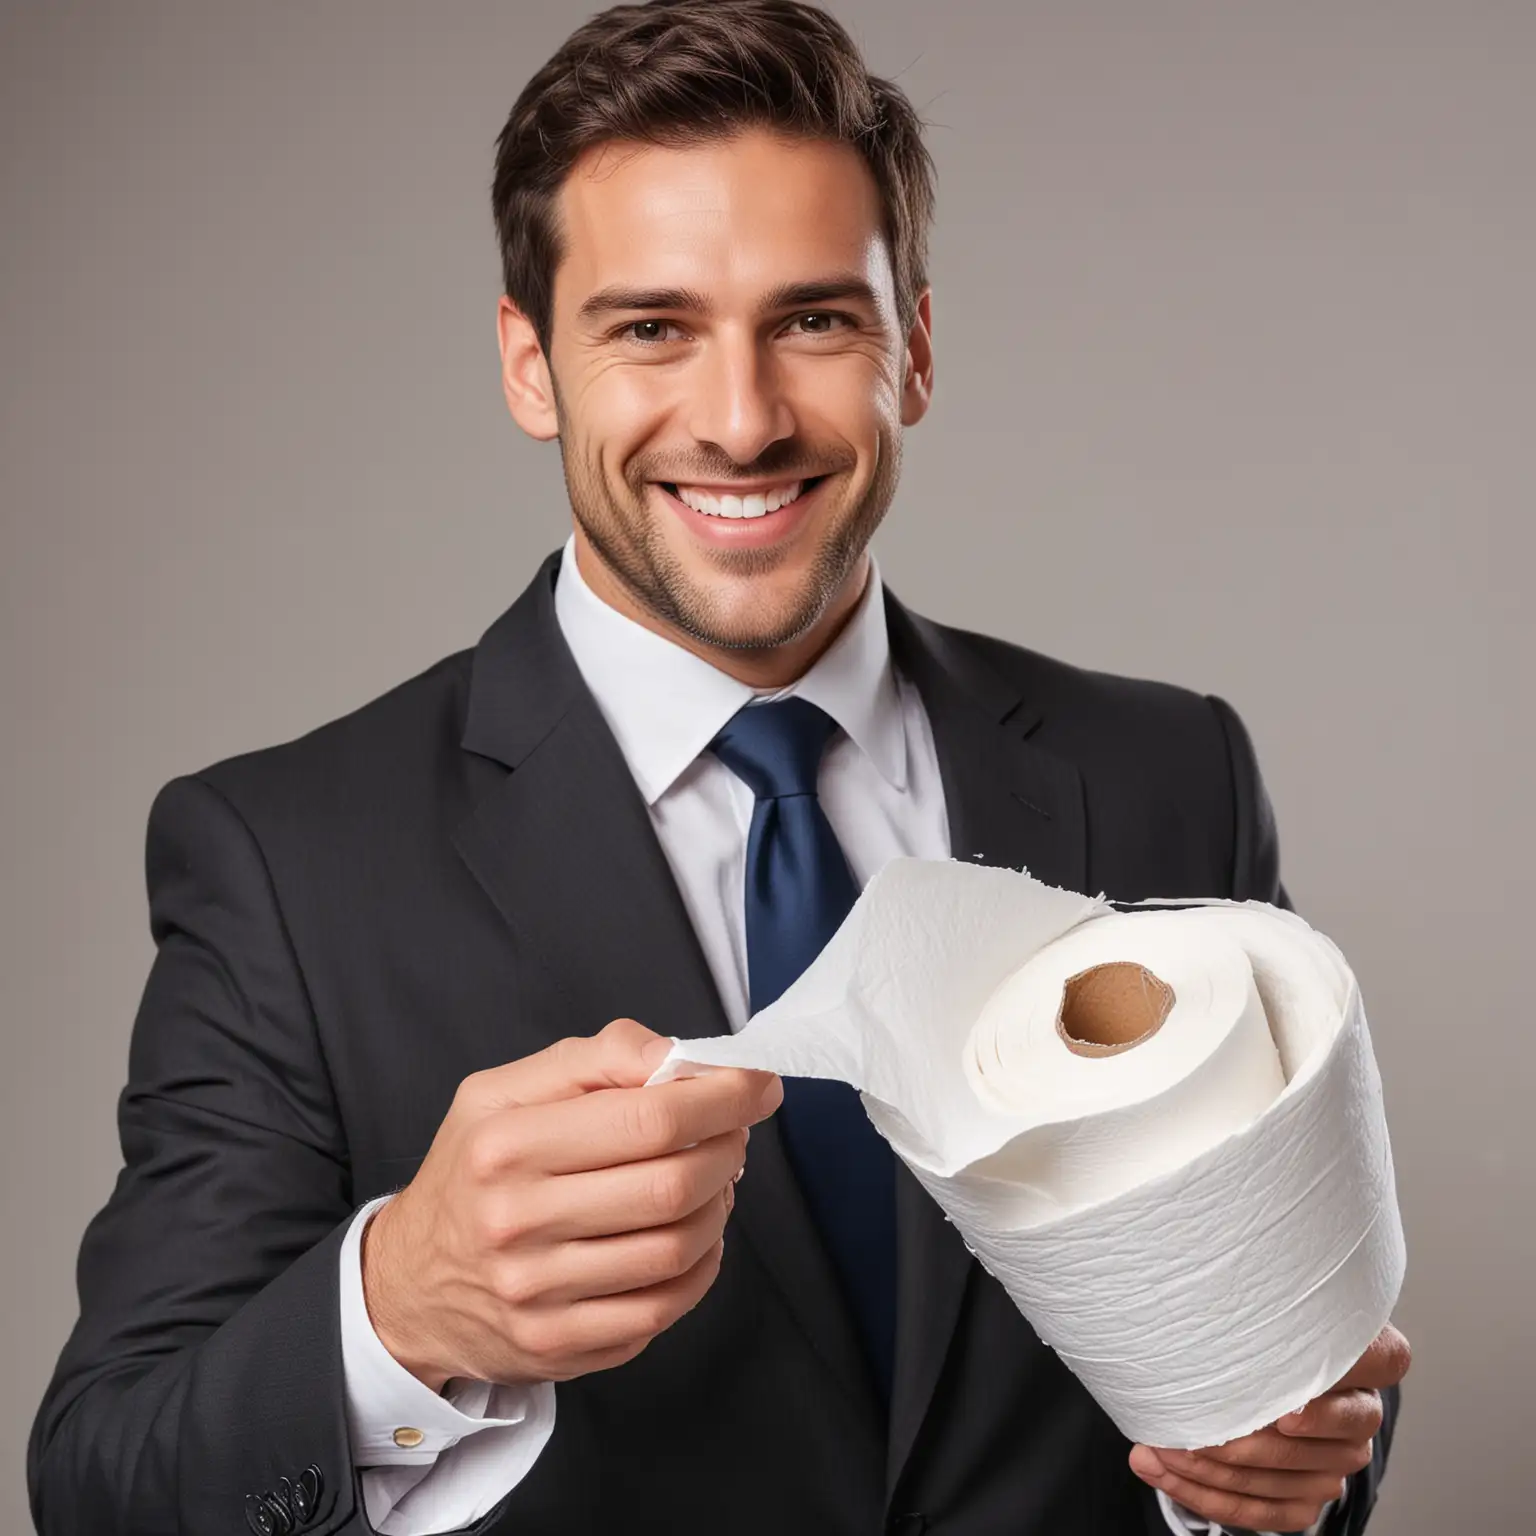 Smiling Businessman Holding Toilet Paper Roll